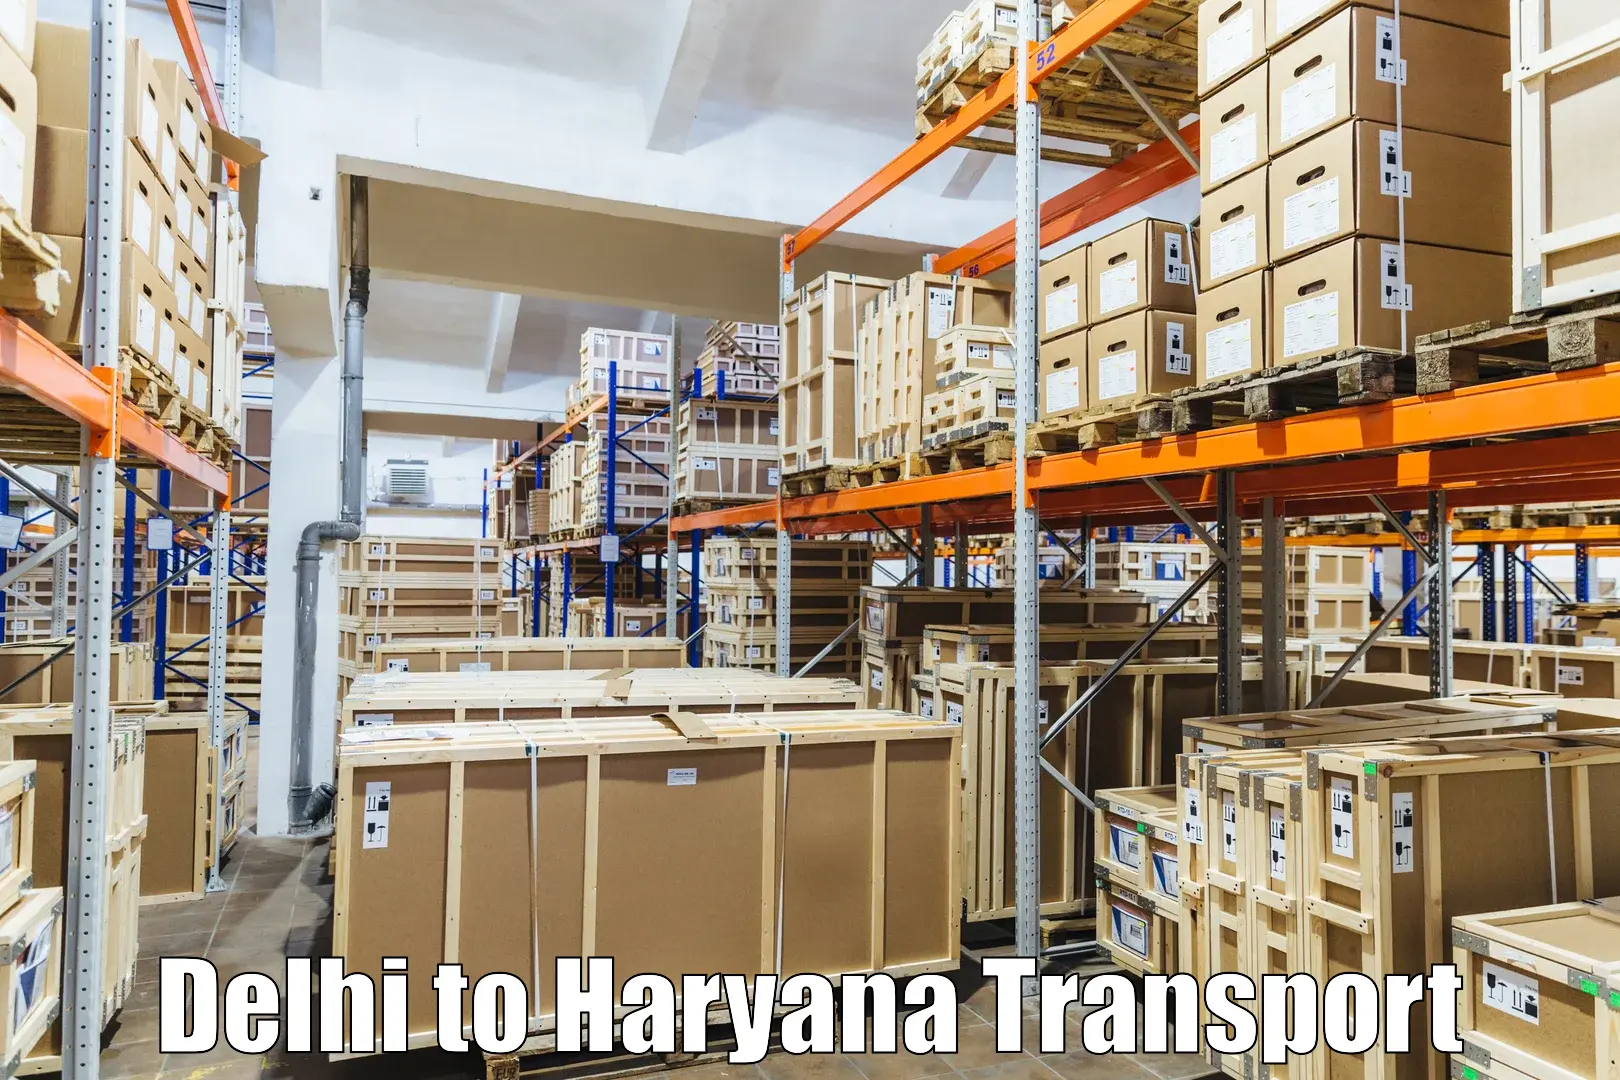 Container transport service Delhi to Odhan